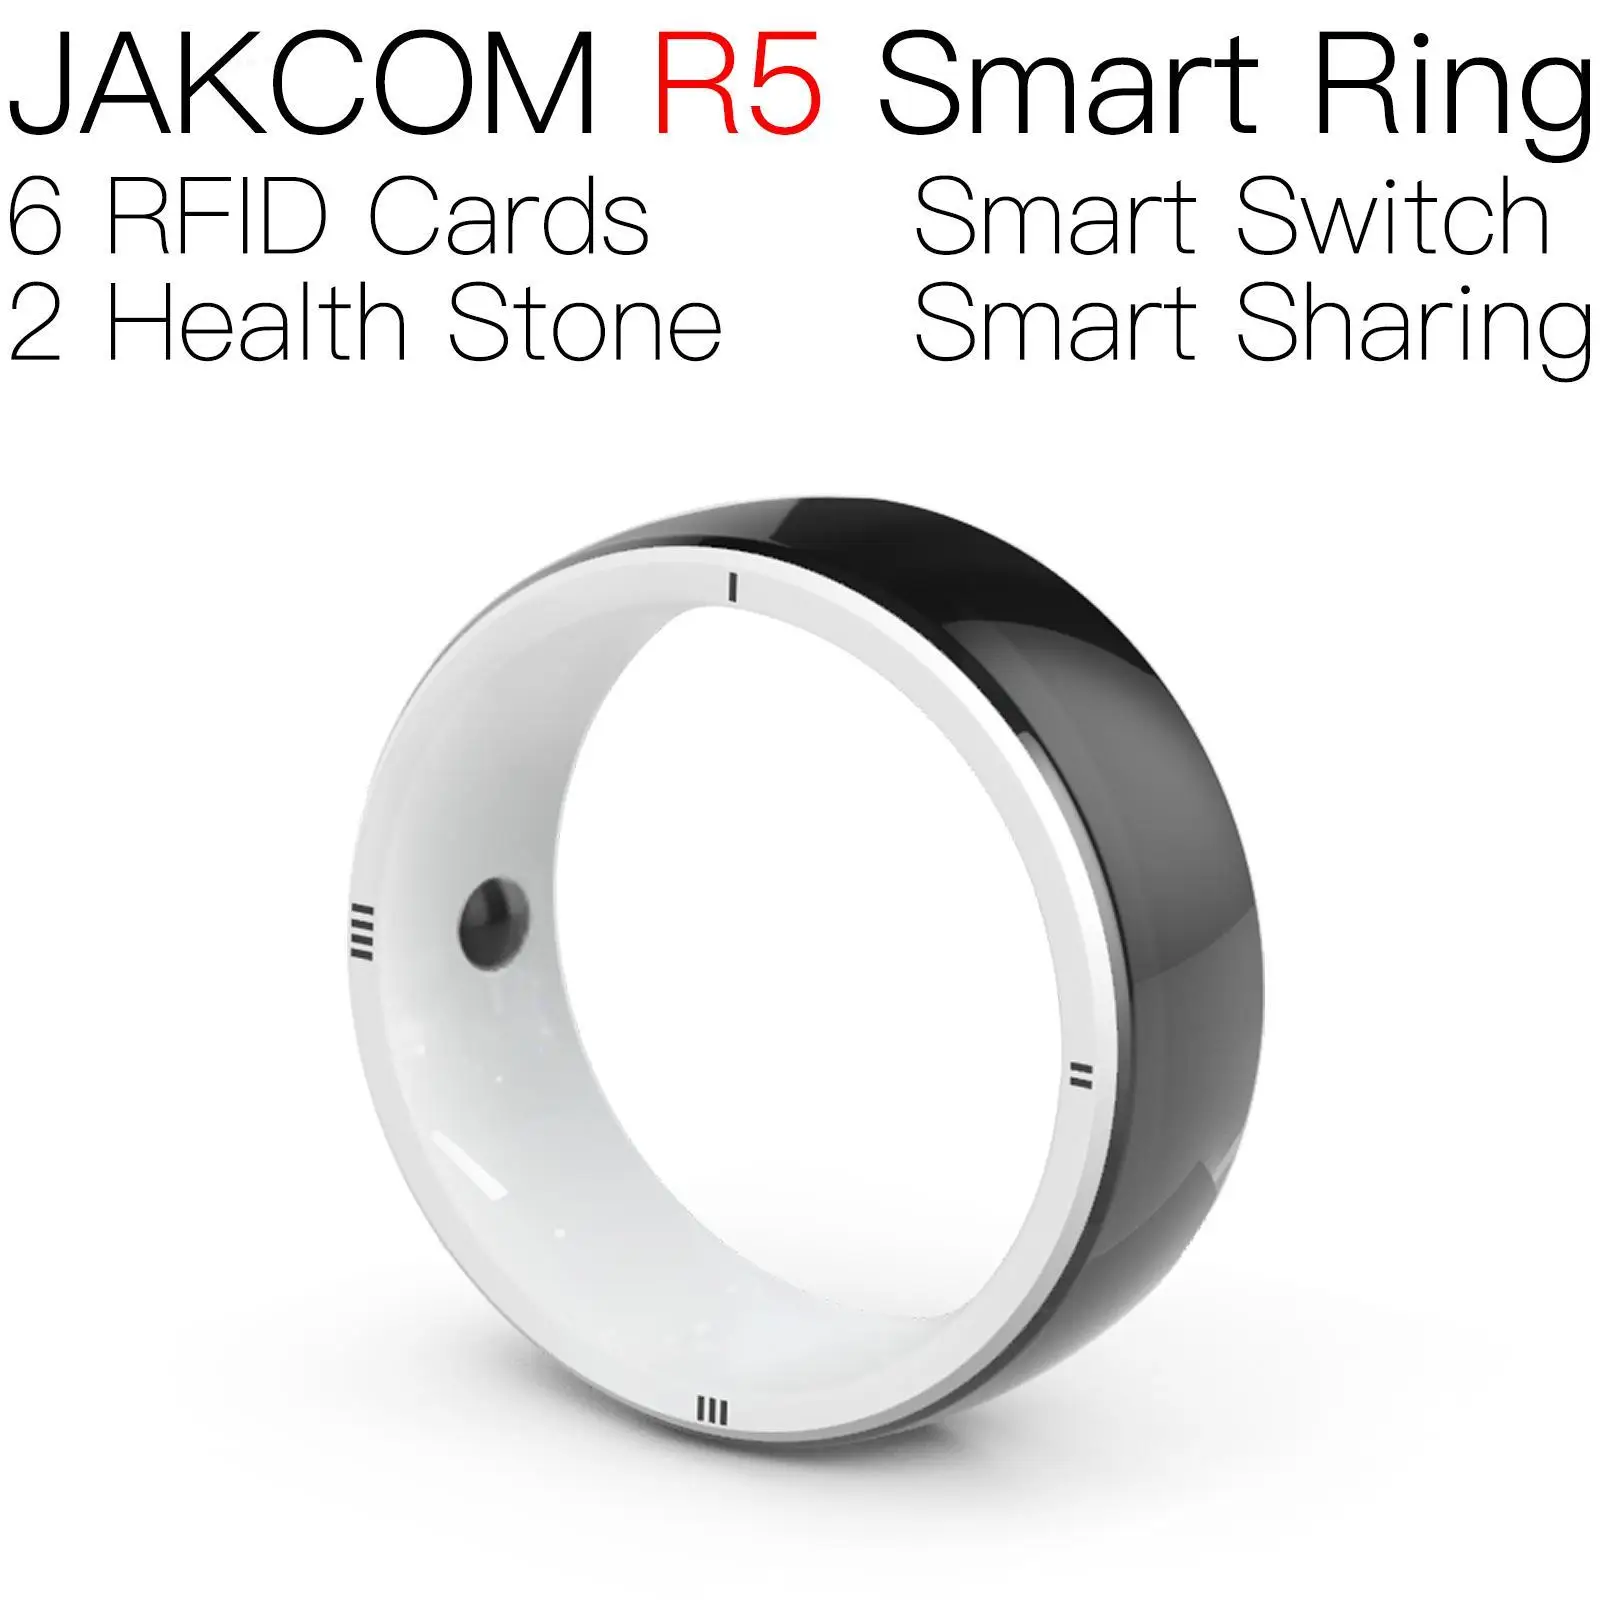 

JAKCOM R5 Smart Ring Newer than thermometers medical blood pressure watch drone 4k professional hw21 qin f21 band 5 8